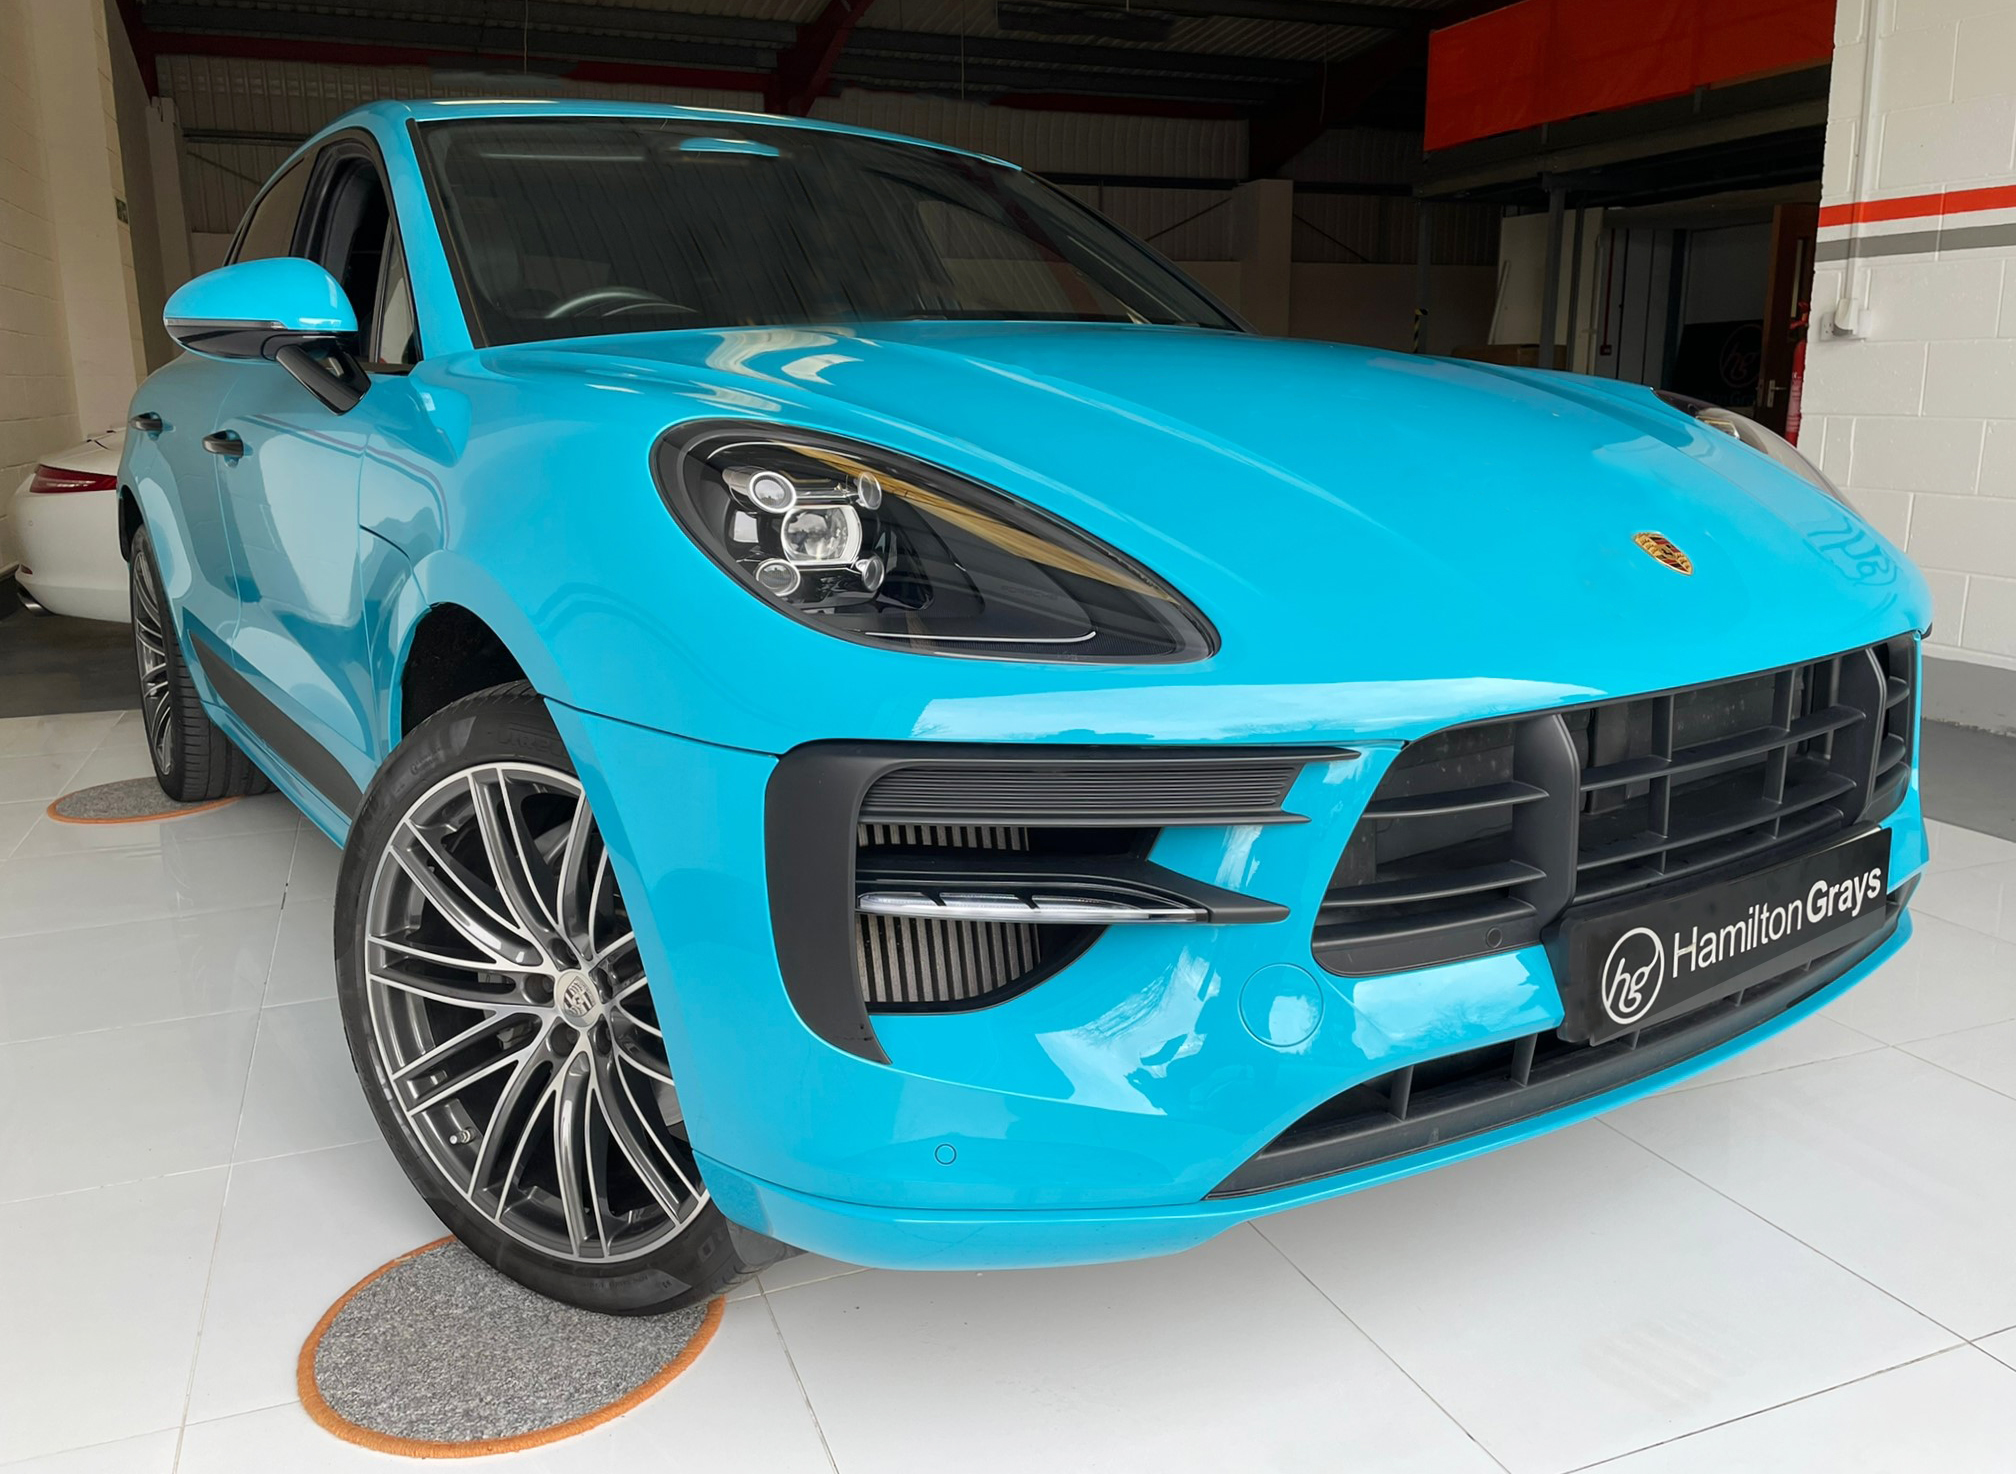 2020 (70) Porsche Macan 3.0T V6 S PDK 4WD. In Striking Miami Blue Metallic with Full Black Leather Interior. 19k.. FPSH. Great Spec’. £58,950